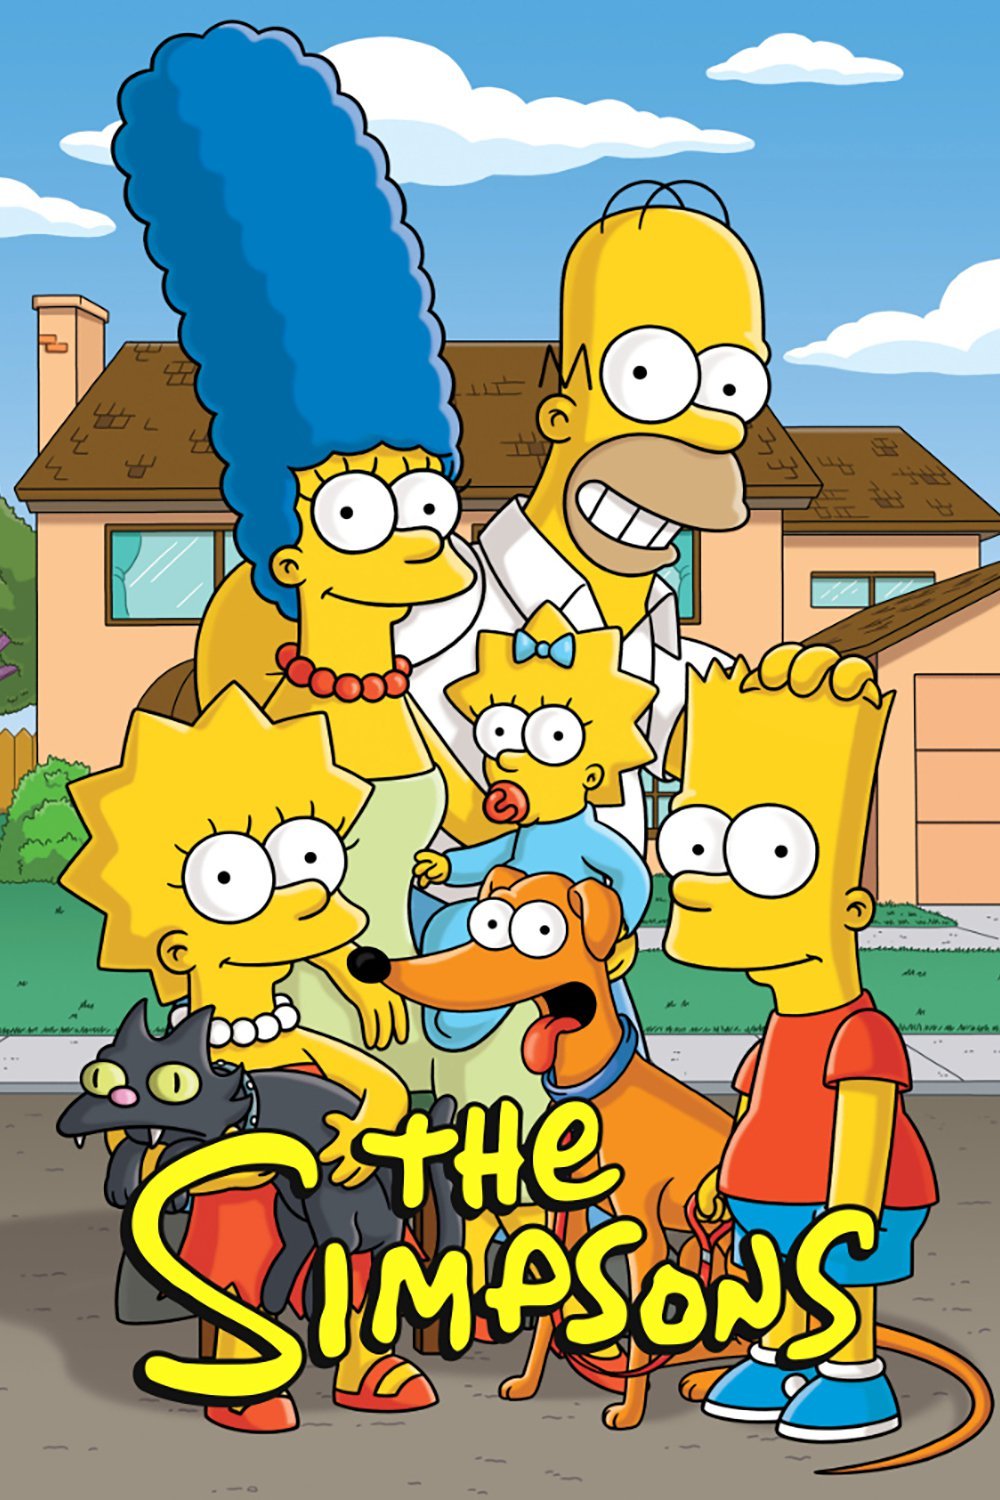 The Simpsons Tv Series 2022, Official Trailer, Release Date